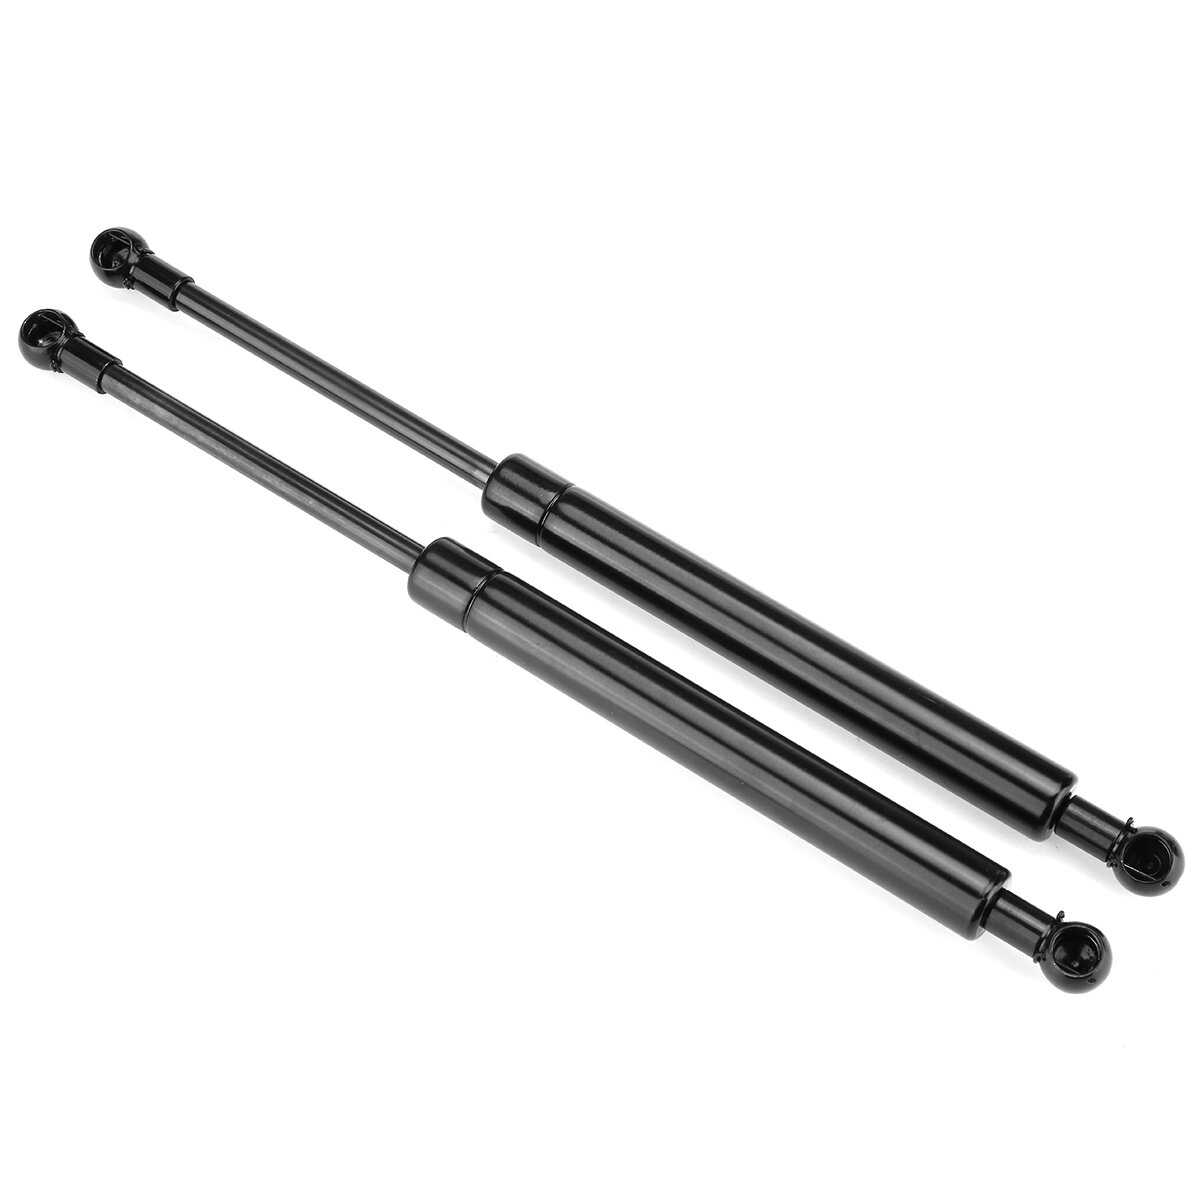 800N 300/350/400/450/500/550/600mm 800N Universal Gas Springs Struts Support Rod For Kit Car or Conv